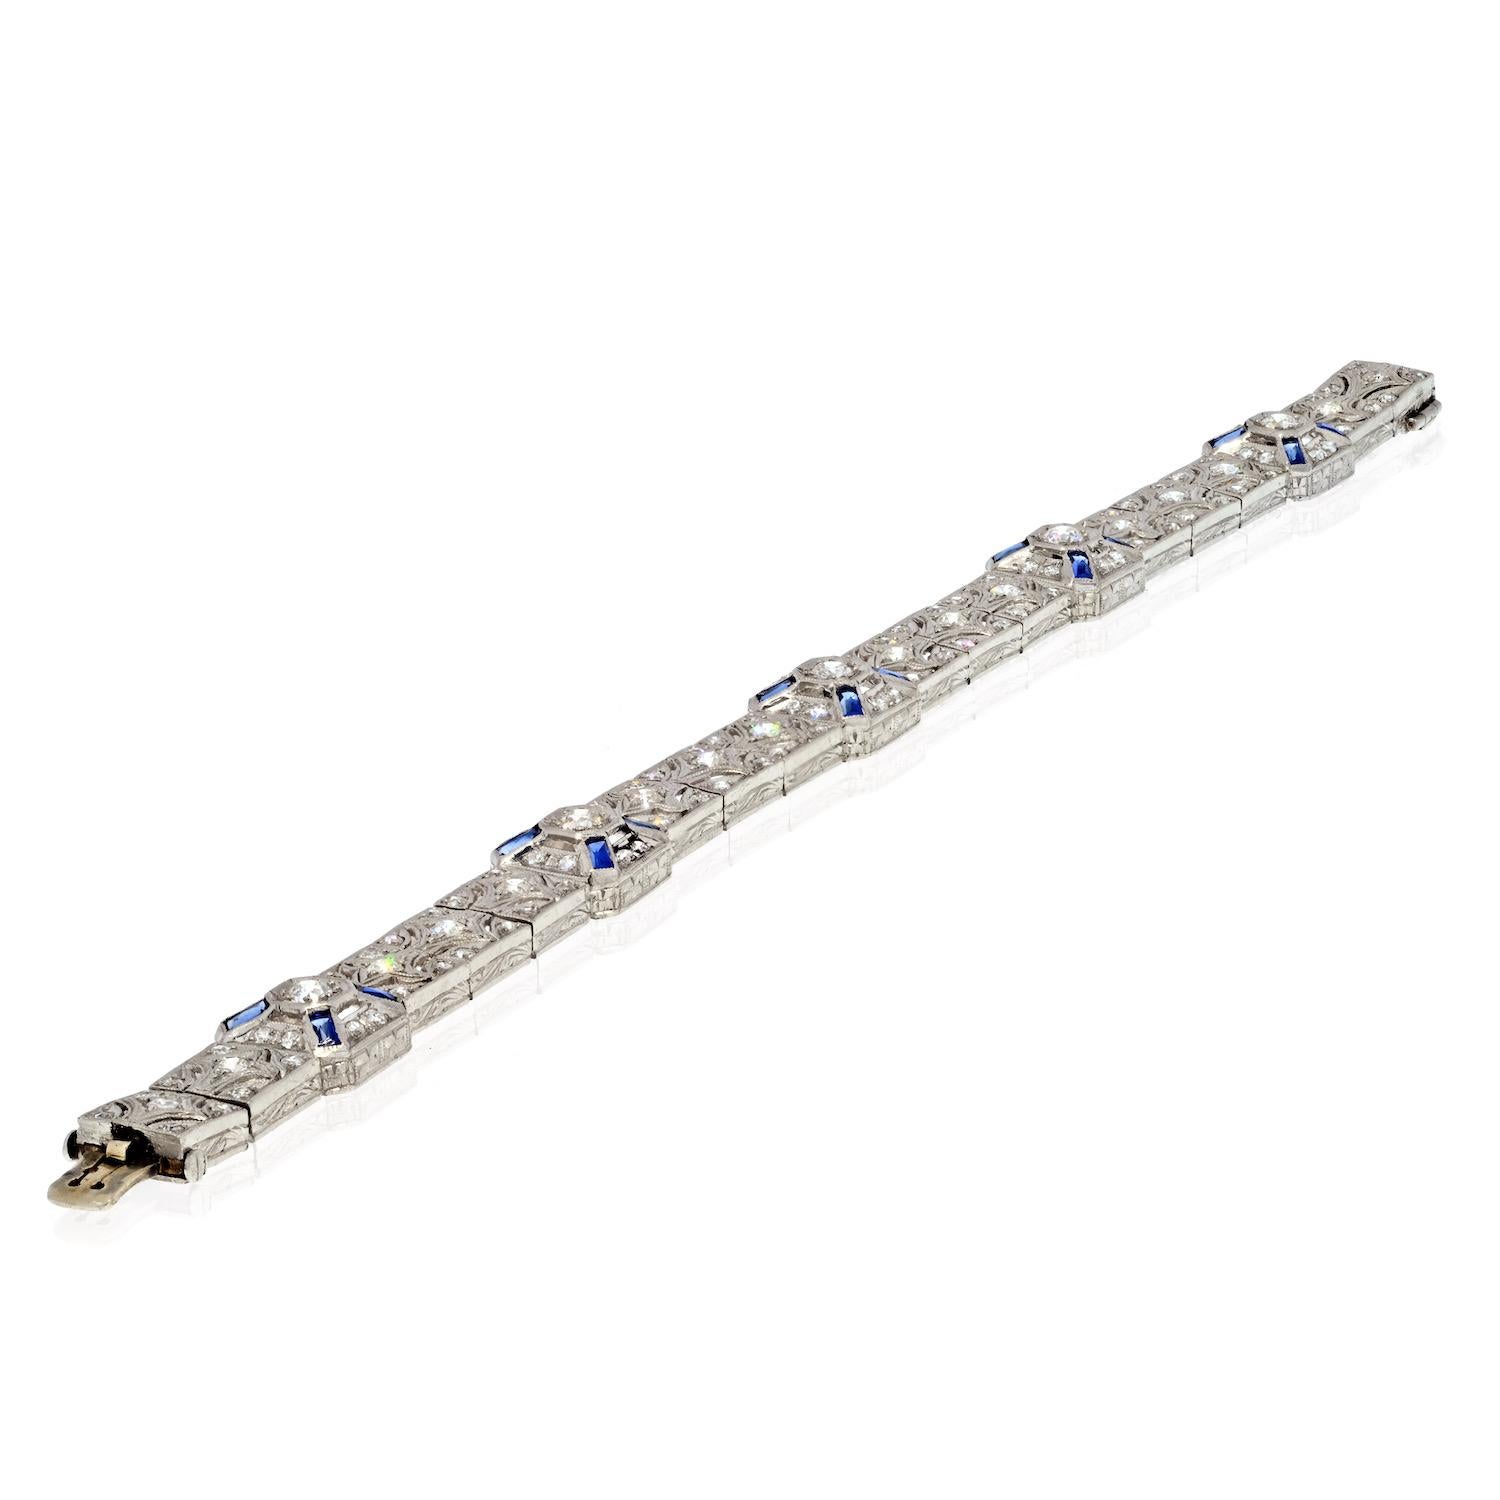 4 carats in diamonds decorate this beautiful Art Deco diamond and sapphire bracelet. Crafted in Platinum. Set with old cut diamonds and baguette cut sapphires. 
Lovely item that will be your favorite bracelet for many years to come. L: 6.75 inches.
